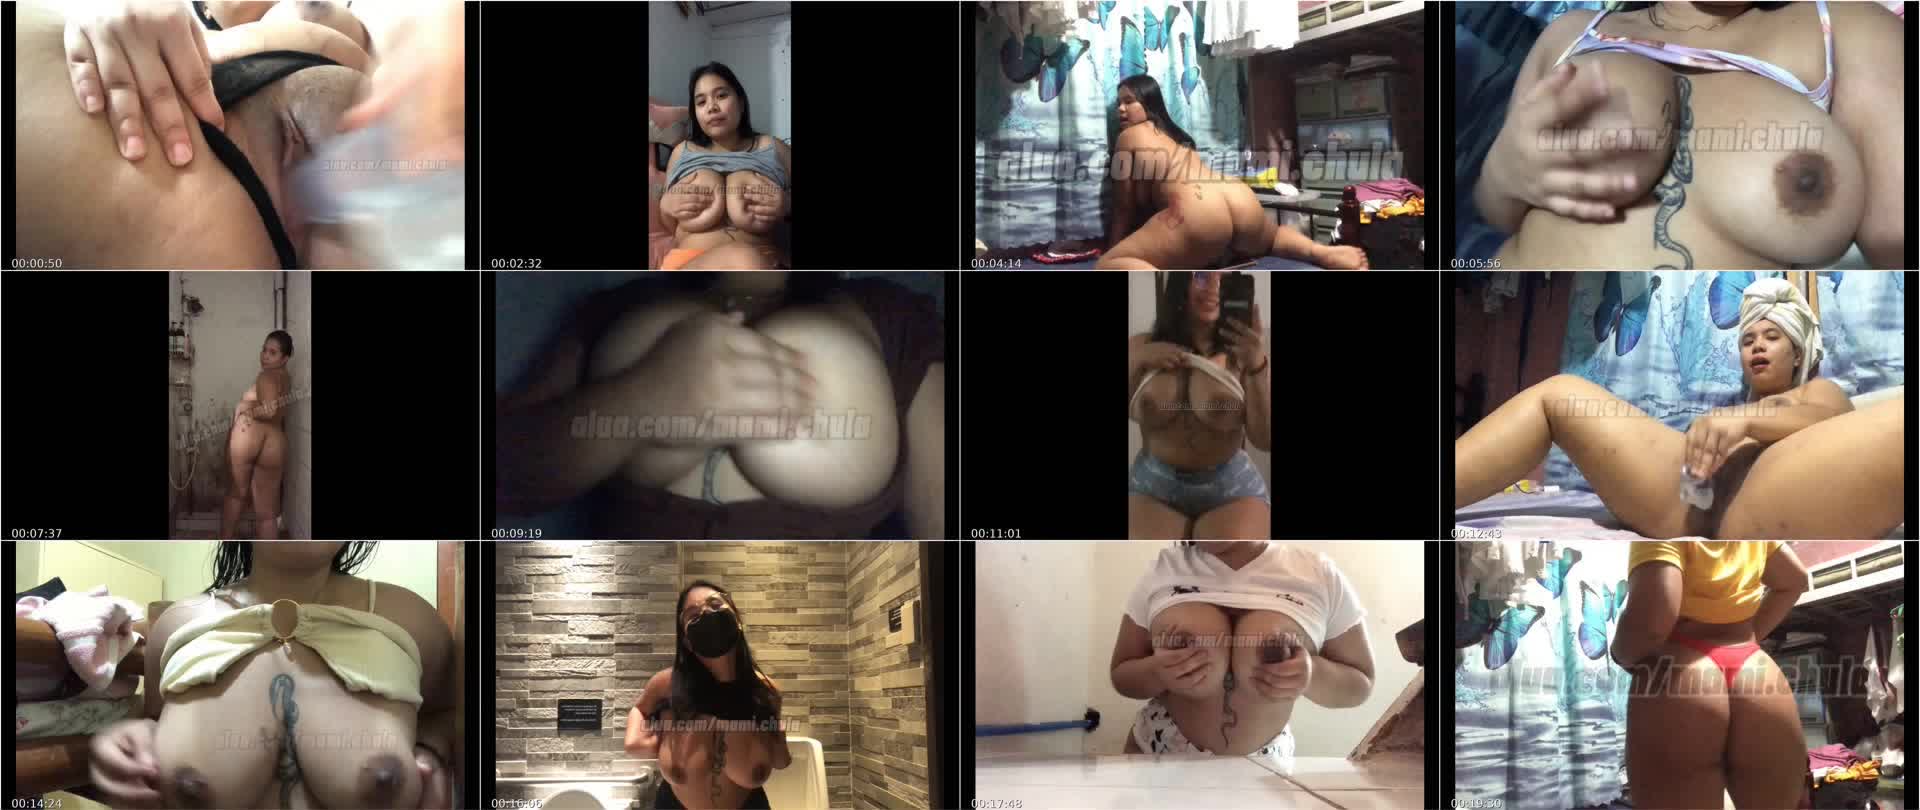 Mami Chula leaked photos and videos